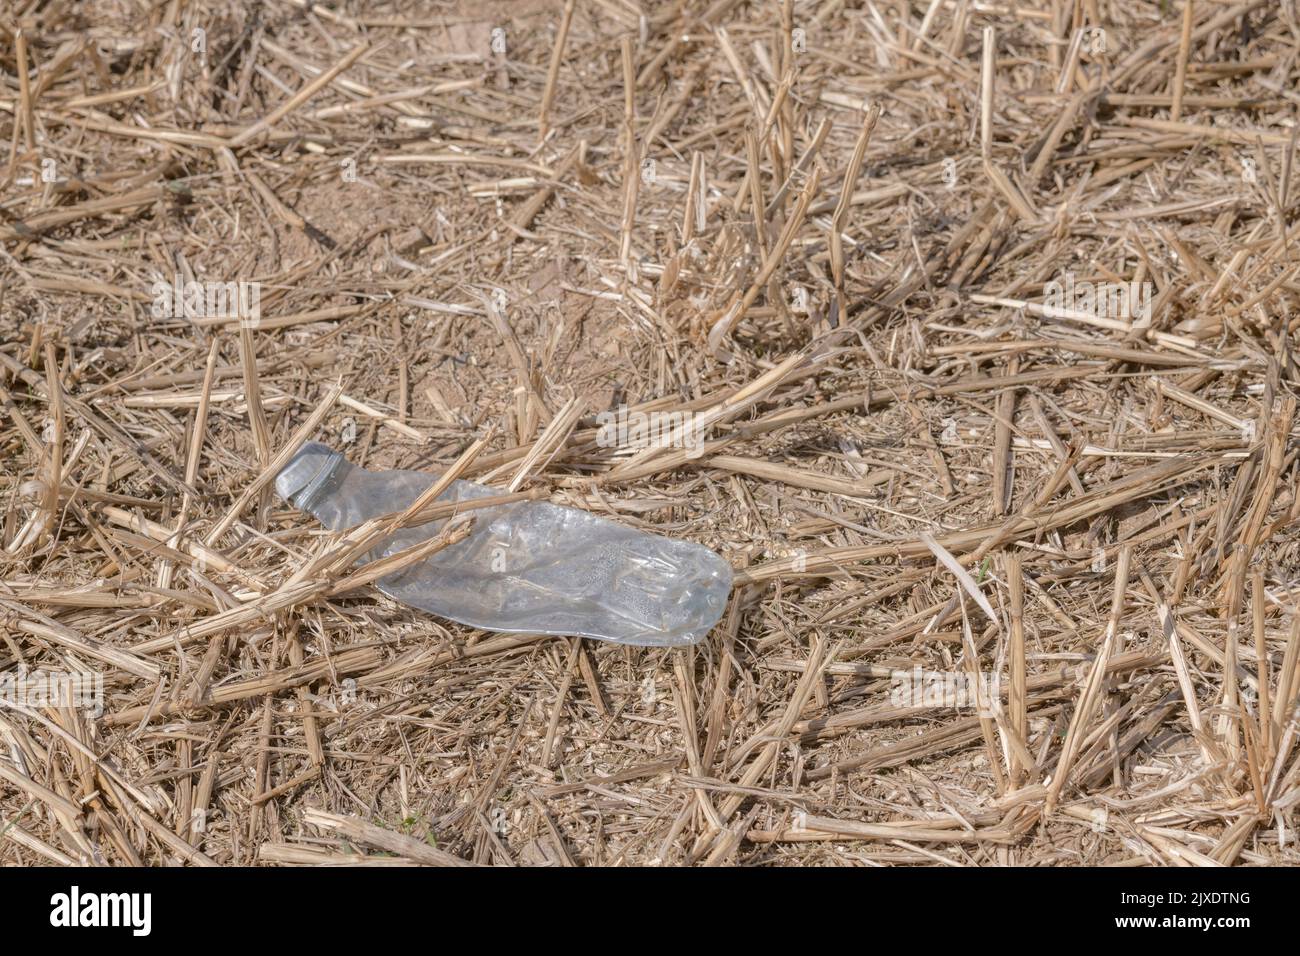 PTFE plastic soft drink bottle discarded in a recently cropped field with straw. For plastic pollution, environmental pollution, war on plastic waste. Stock Photo